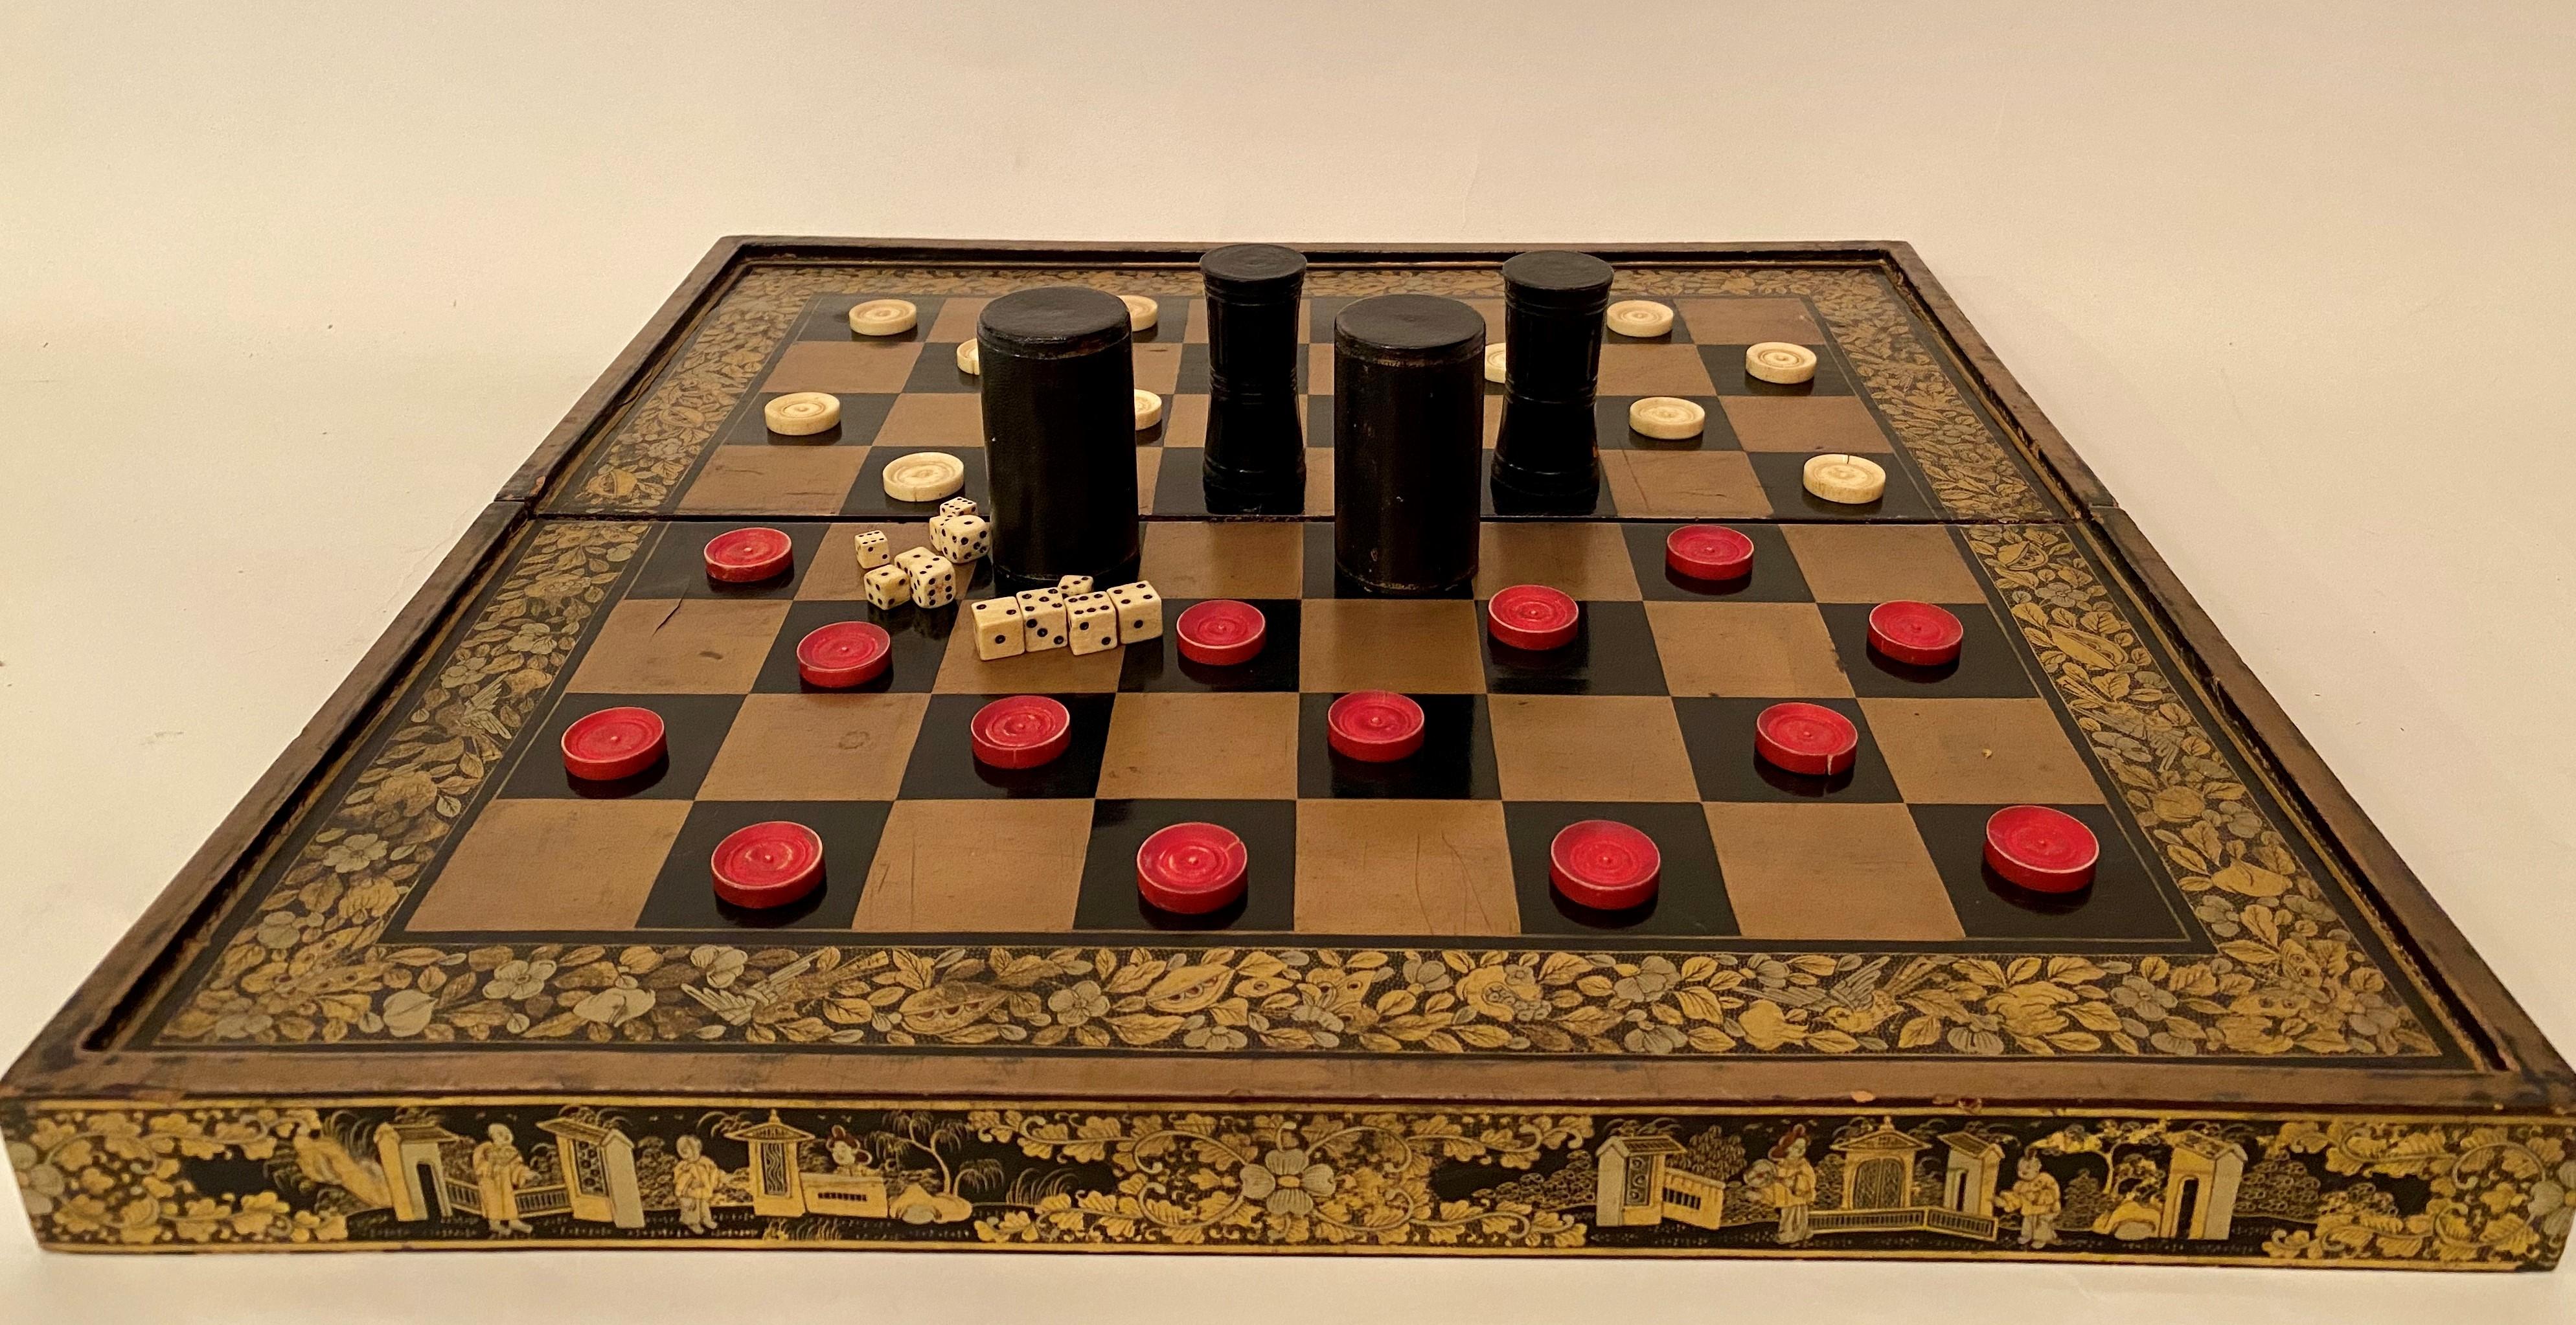 A 19th century Chinese export lacquer chess and backgammon board 50 cm x 50 cm with gold black lacquer board, with white and red counters and galloping dominoes.